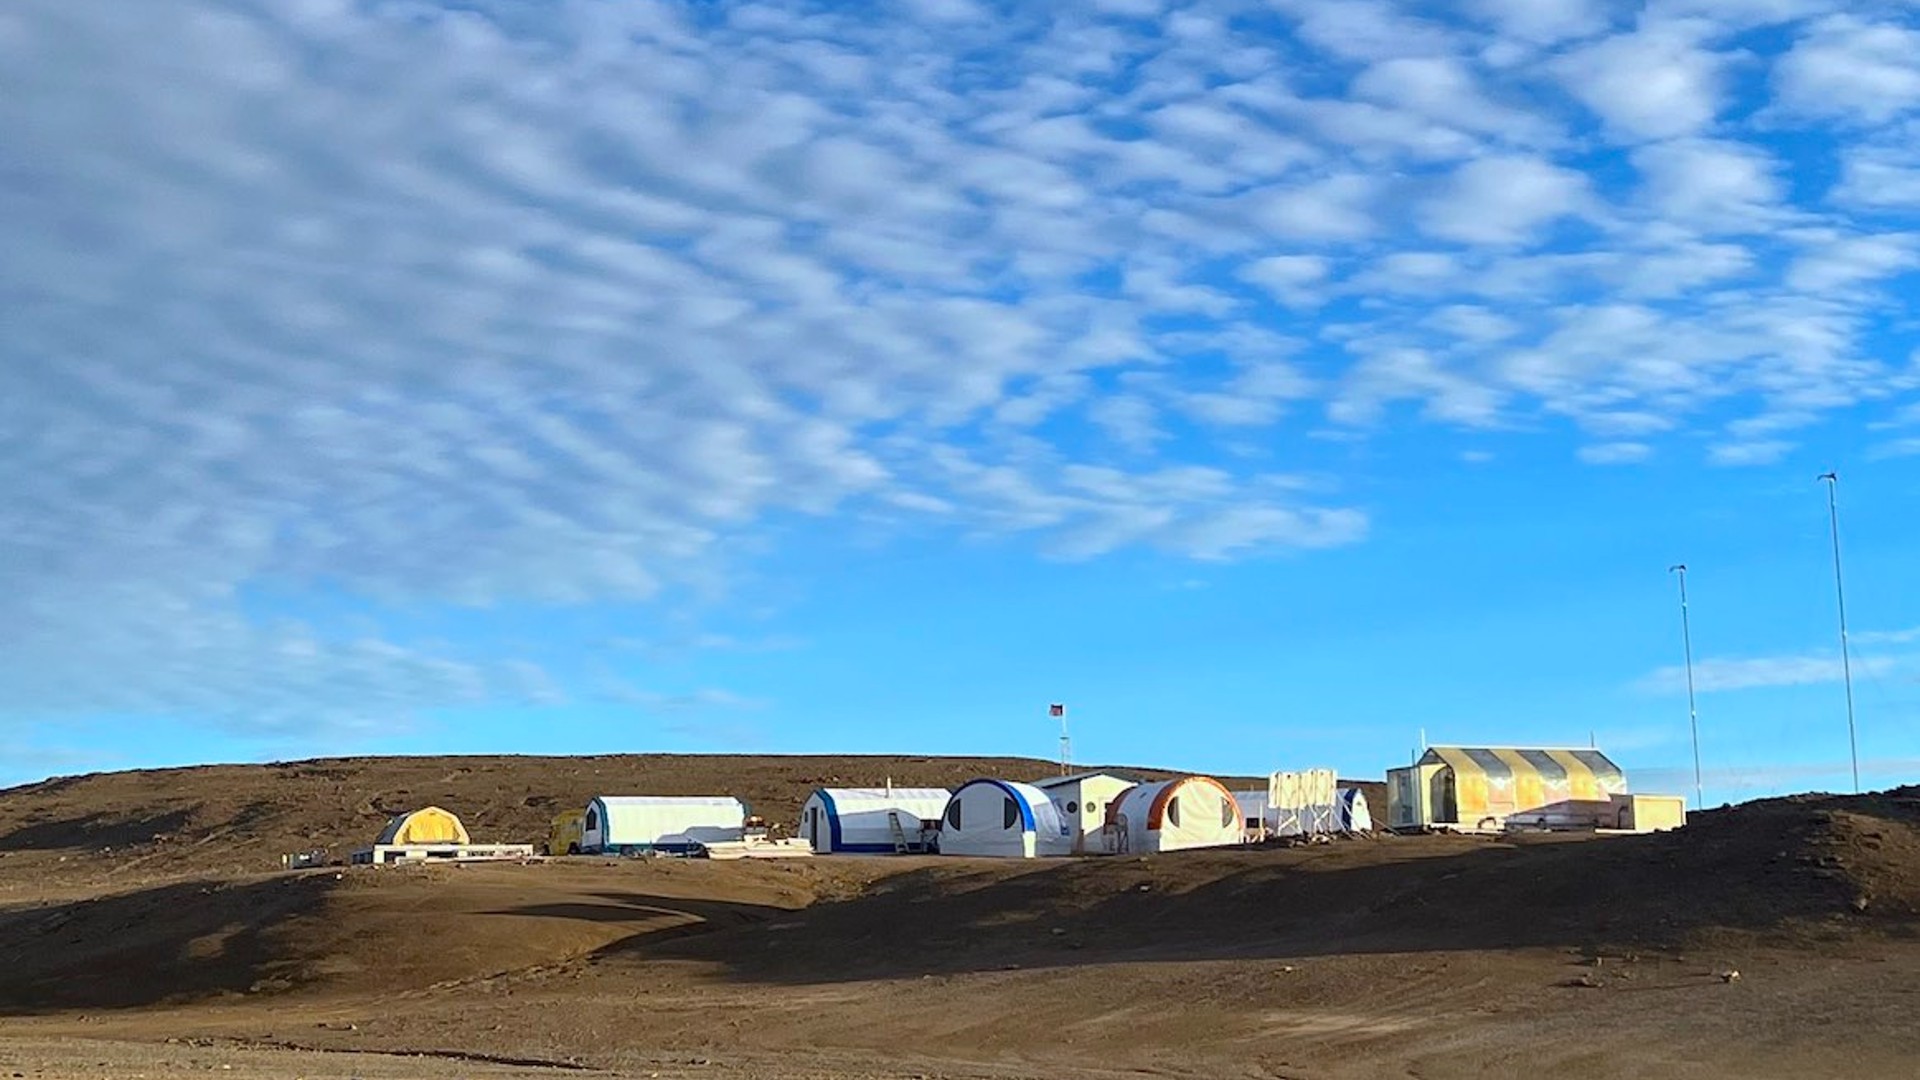 A view of the Haughton-Mars Project base.